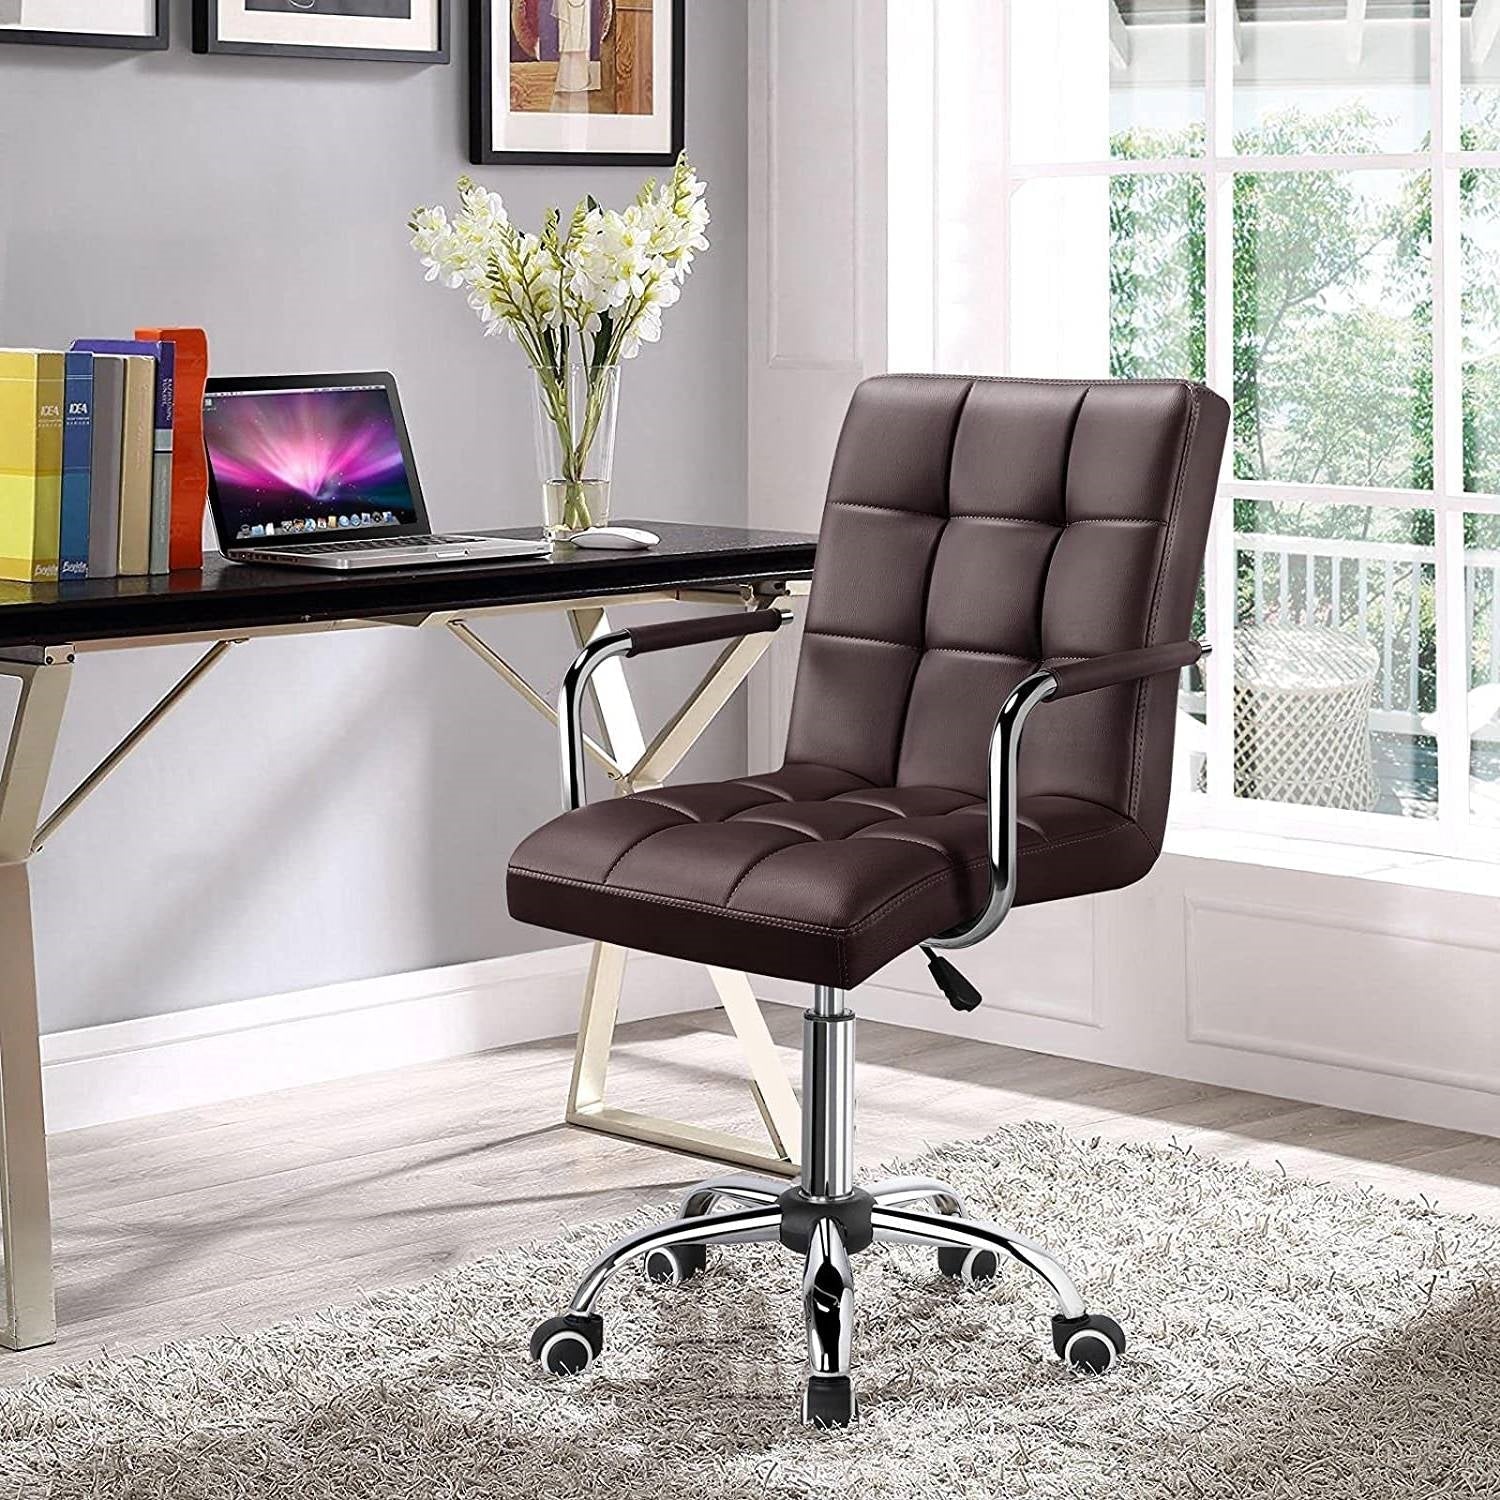 Office > Office Chairs - Dark Brown Modern Faux Leather Mid-Back Office Chair With Armrests And Wheels